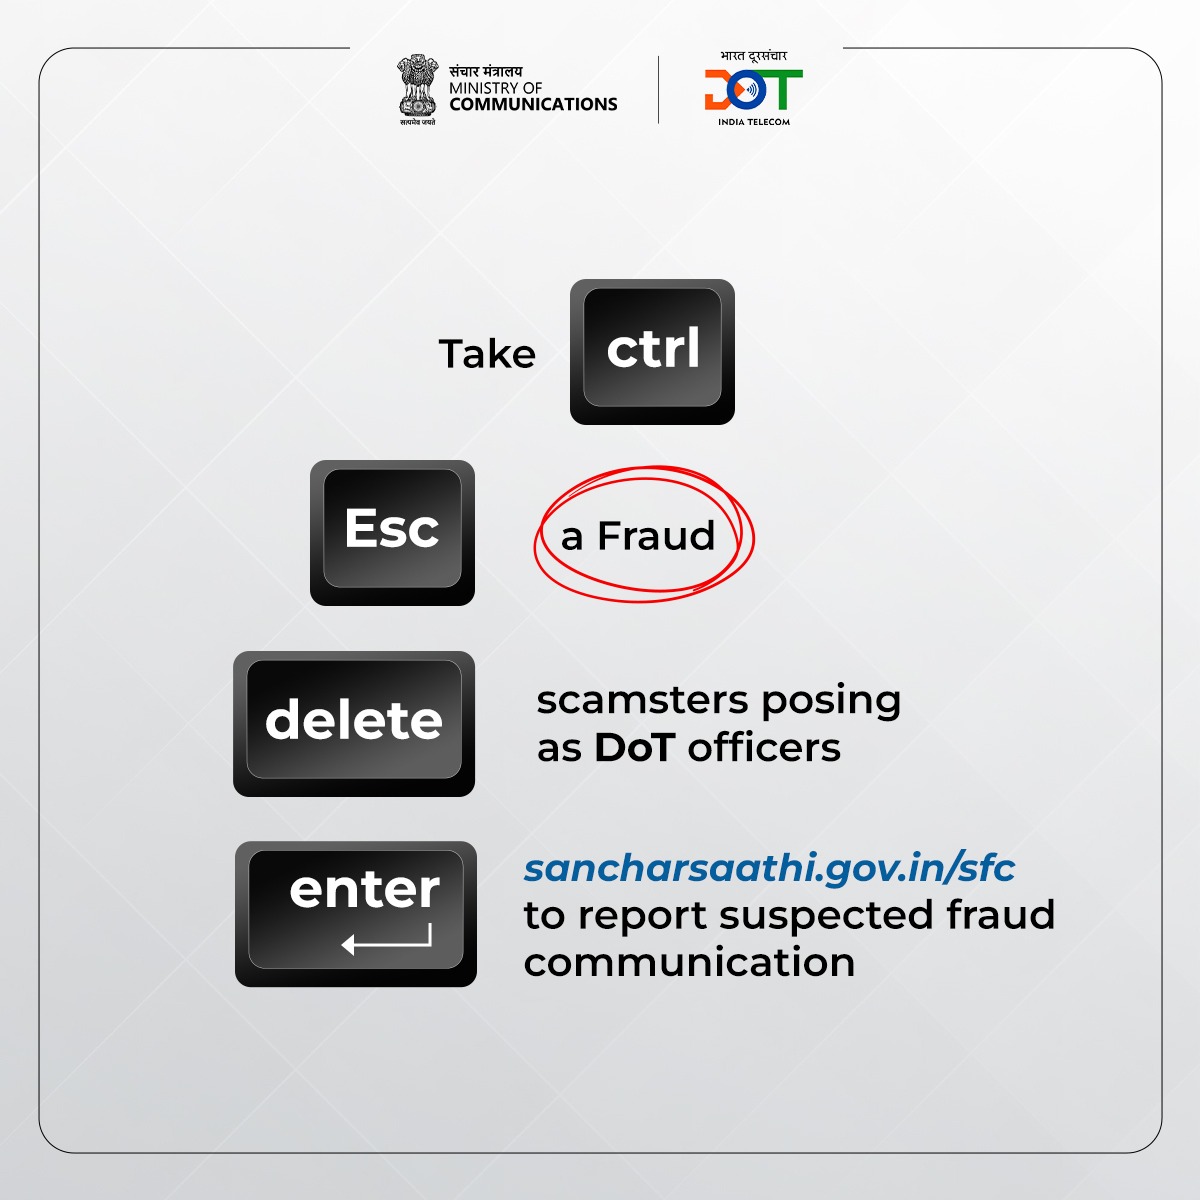 FAKE CALLS - Don’t take any calls threatening to disconnect your mobile on behalf of DoT/TRAI and report at www.sancharsaathi.gov.in